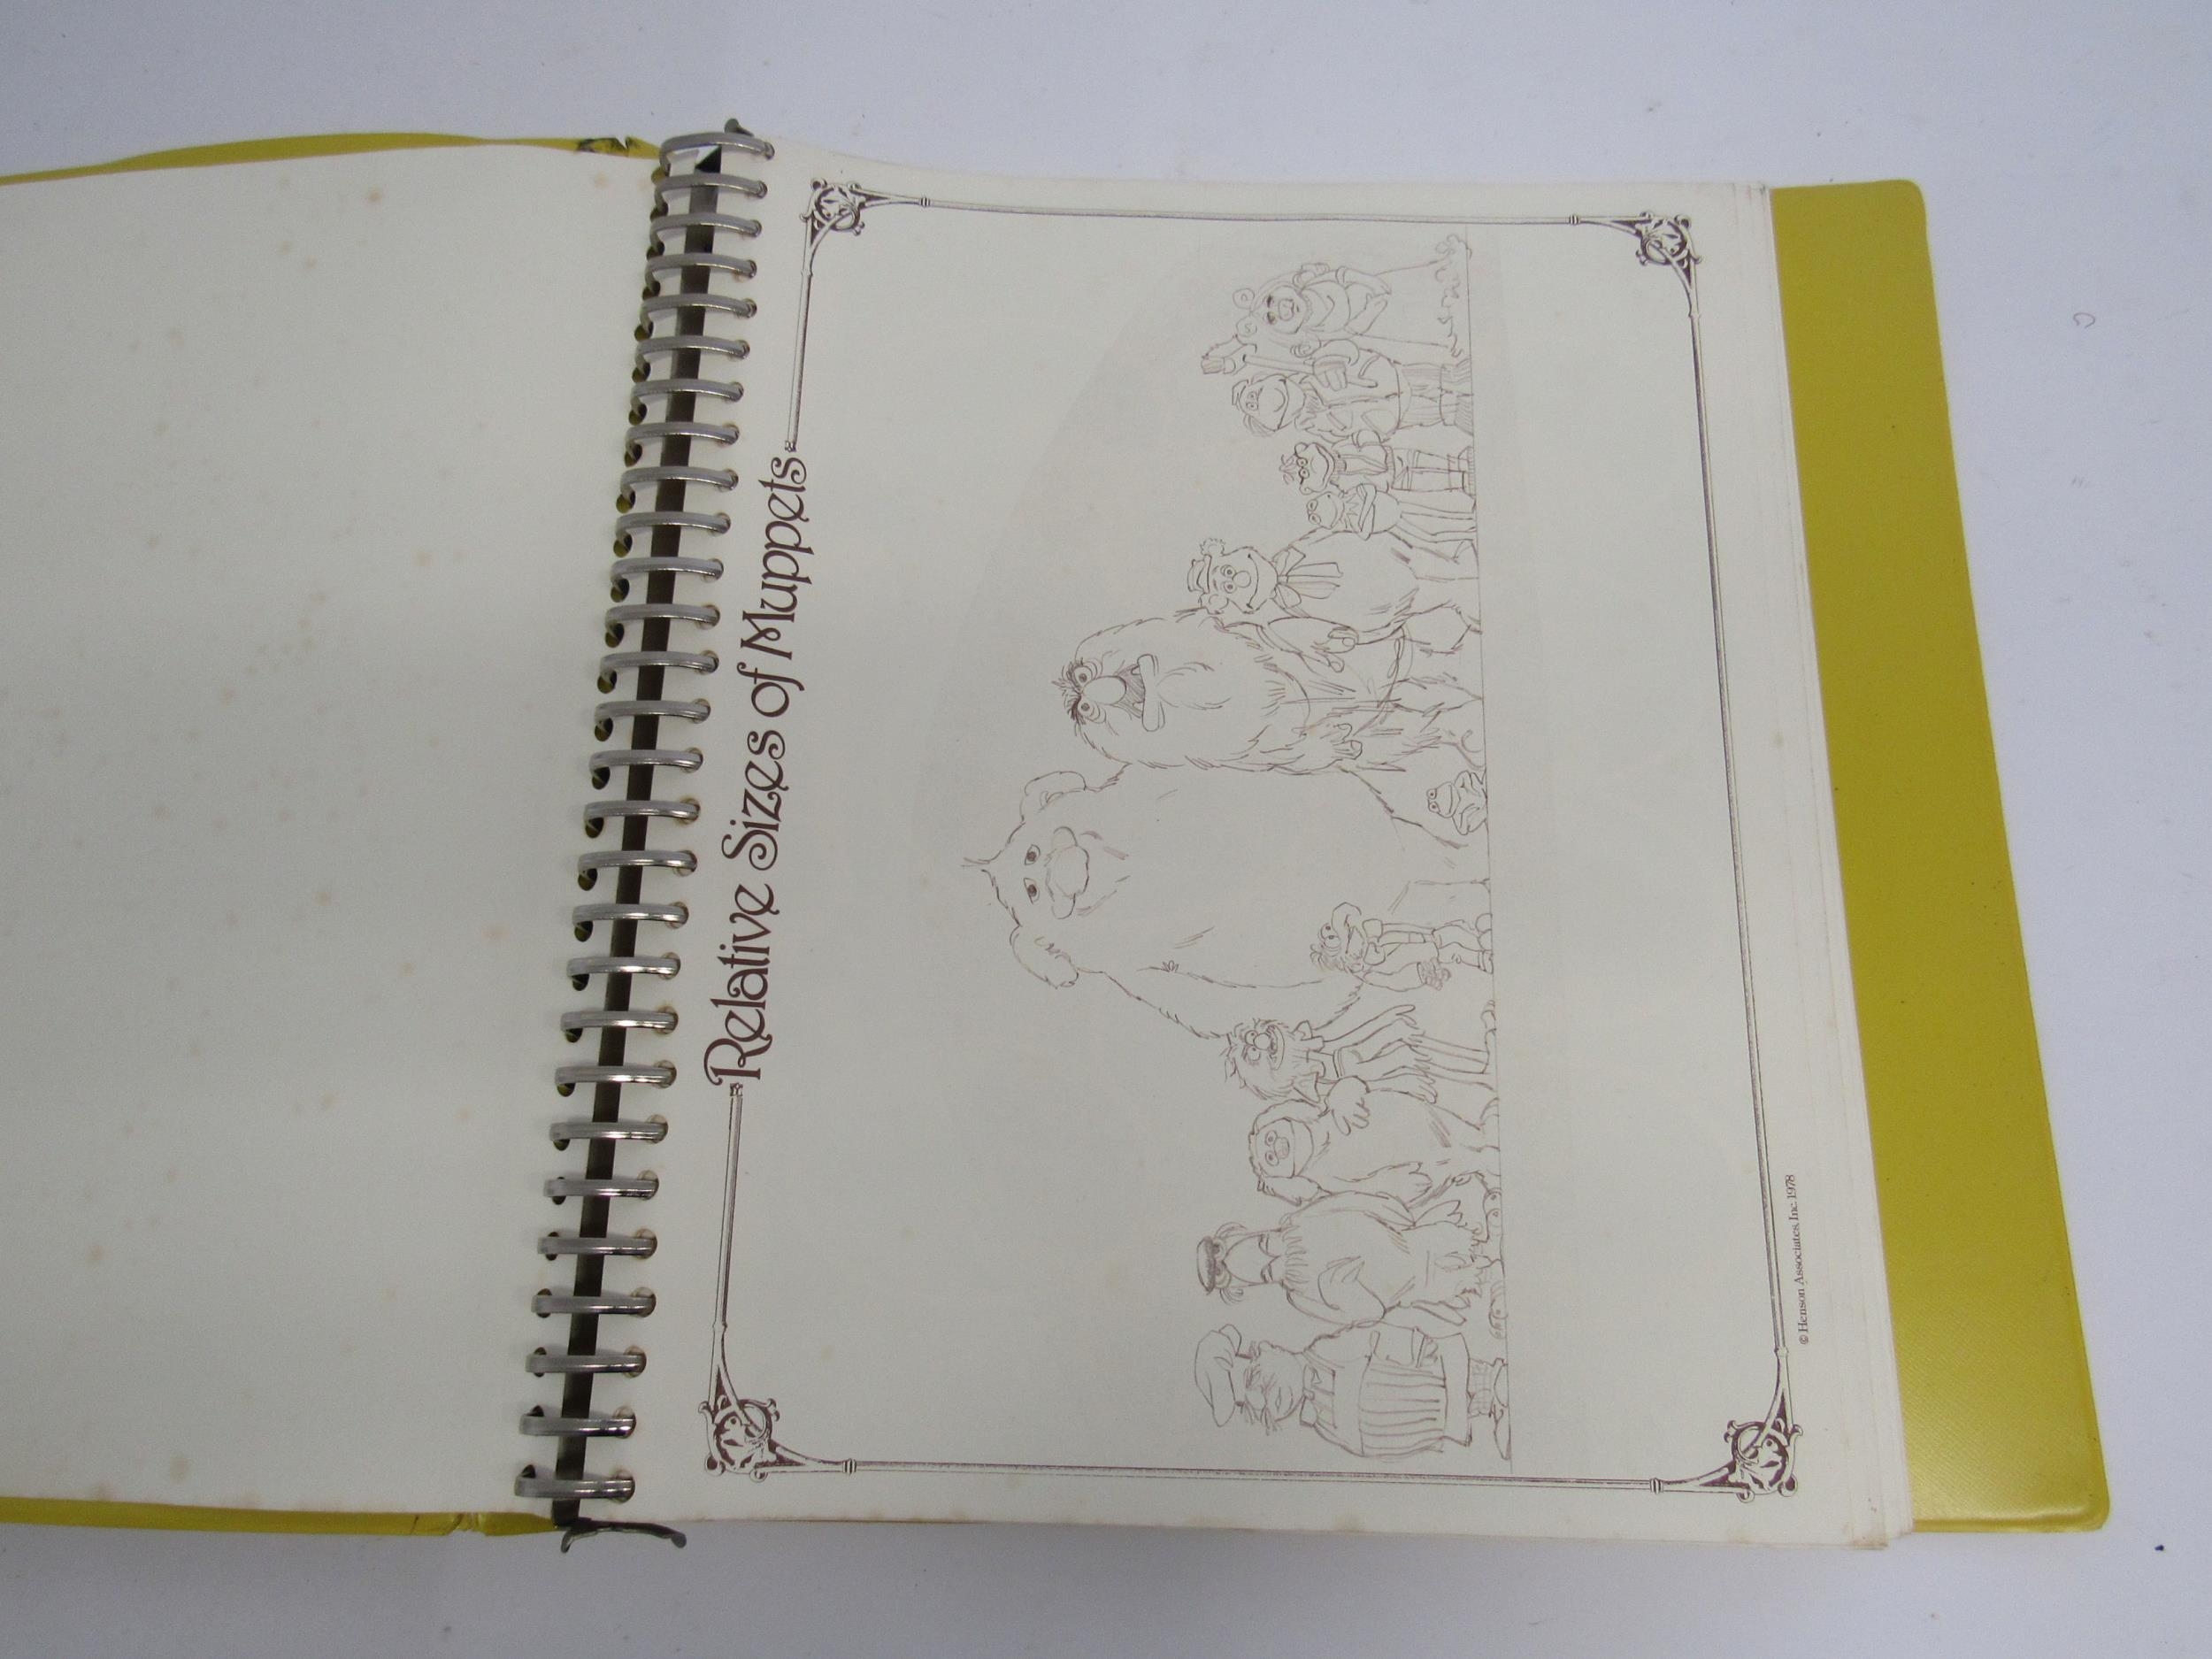 'The Muppet Show Style Book', book of style guides and character motifs for The Muppets, distributed - Image 3 of 9